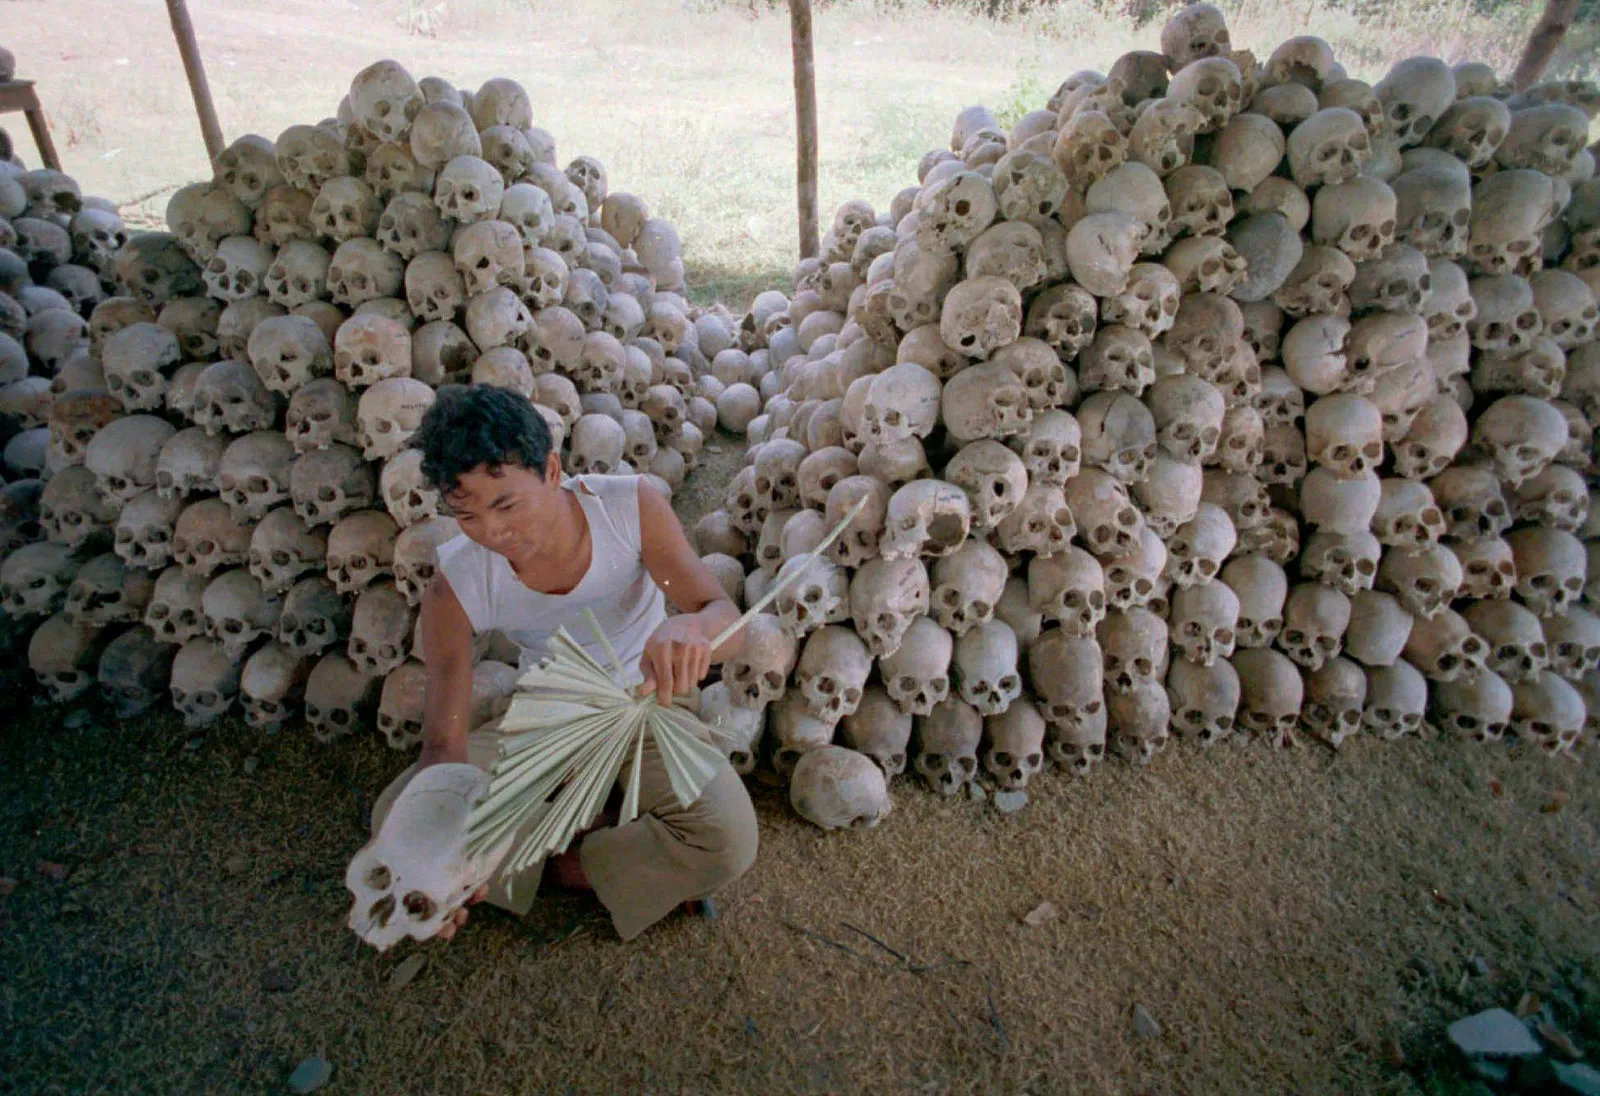 Landmark Verdict Finds Two of Khmer Rouge's Surviving Leaders Guilty of Genocide | Smart News| Smithsonian Magazine